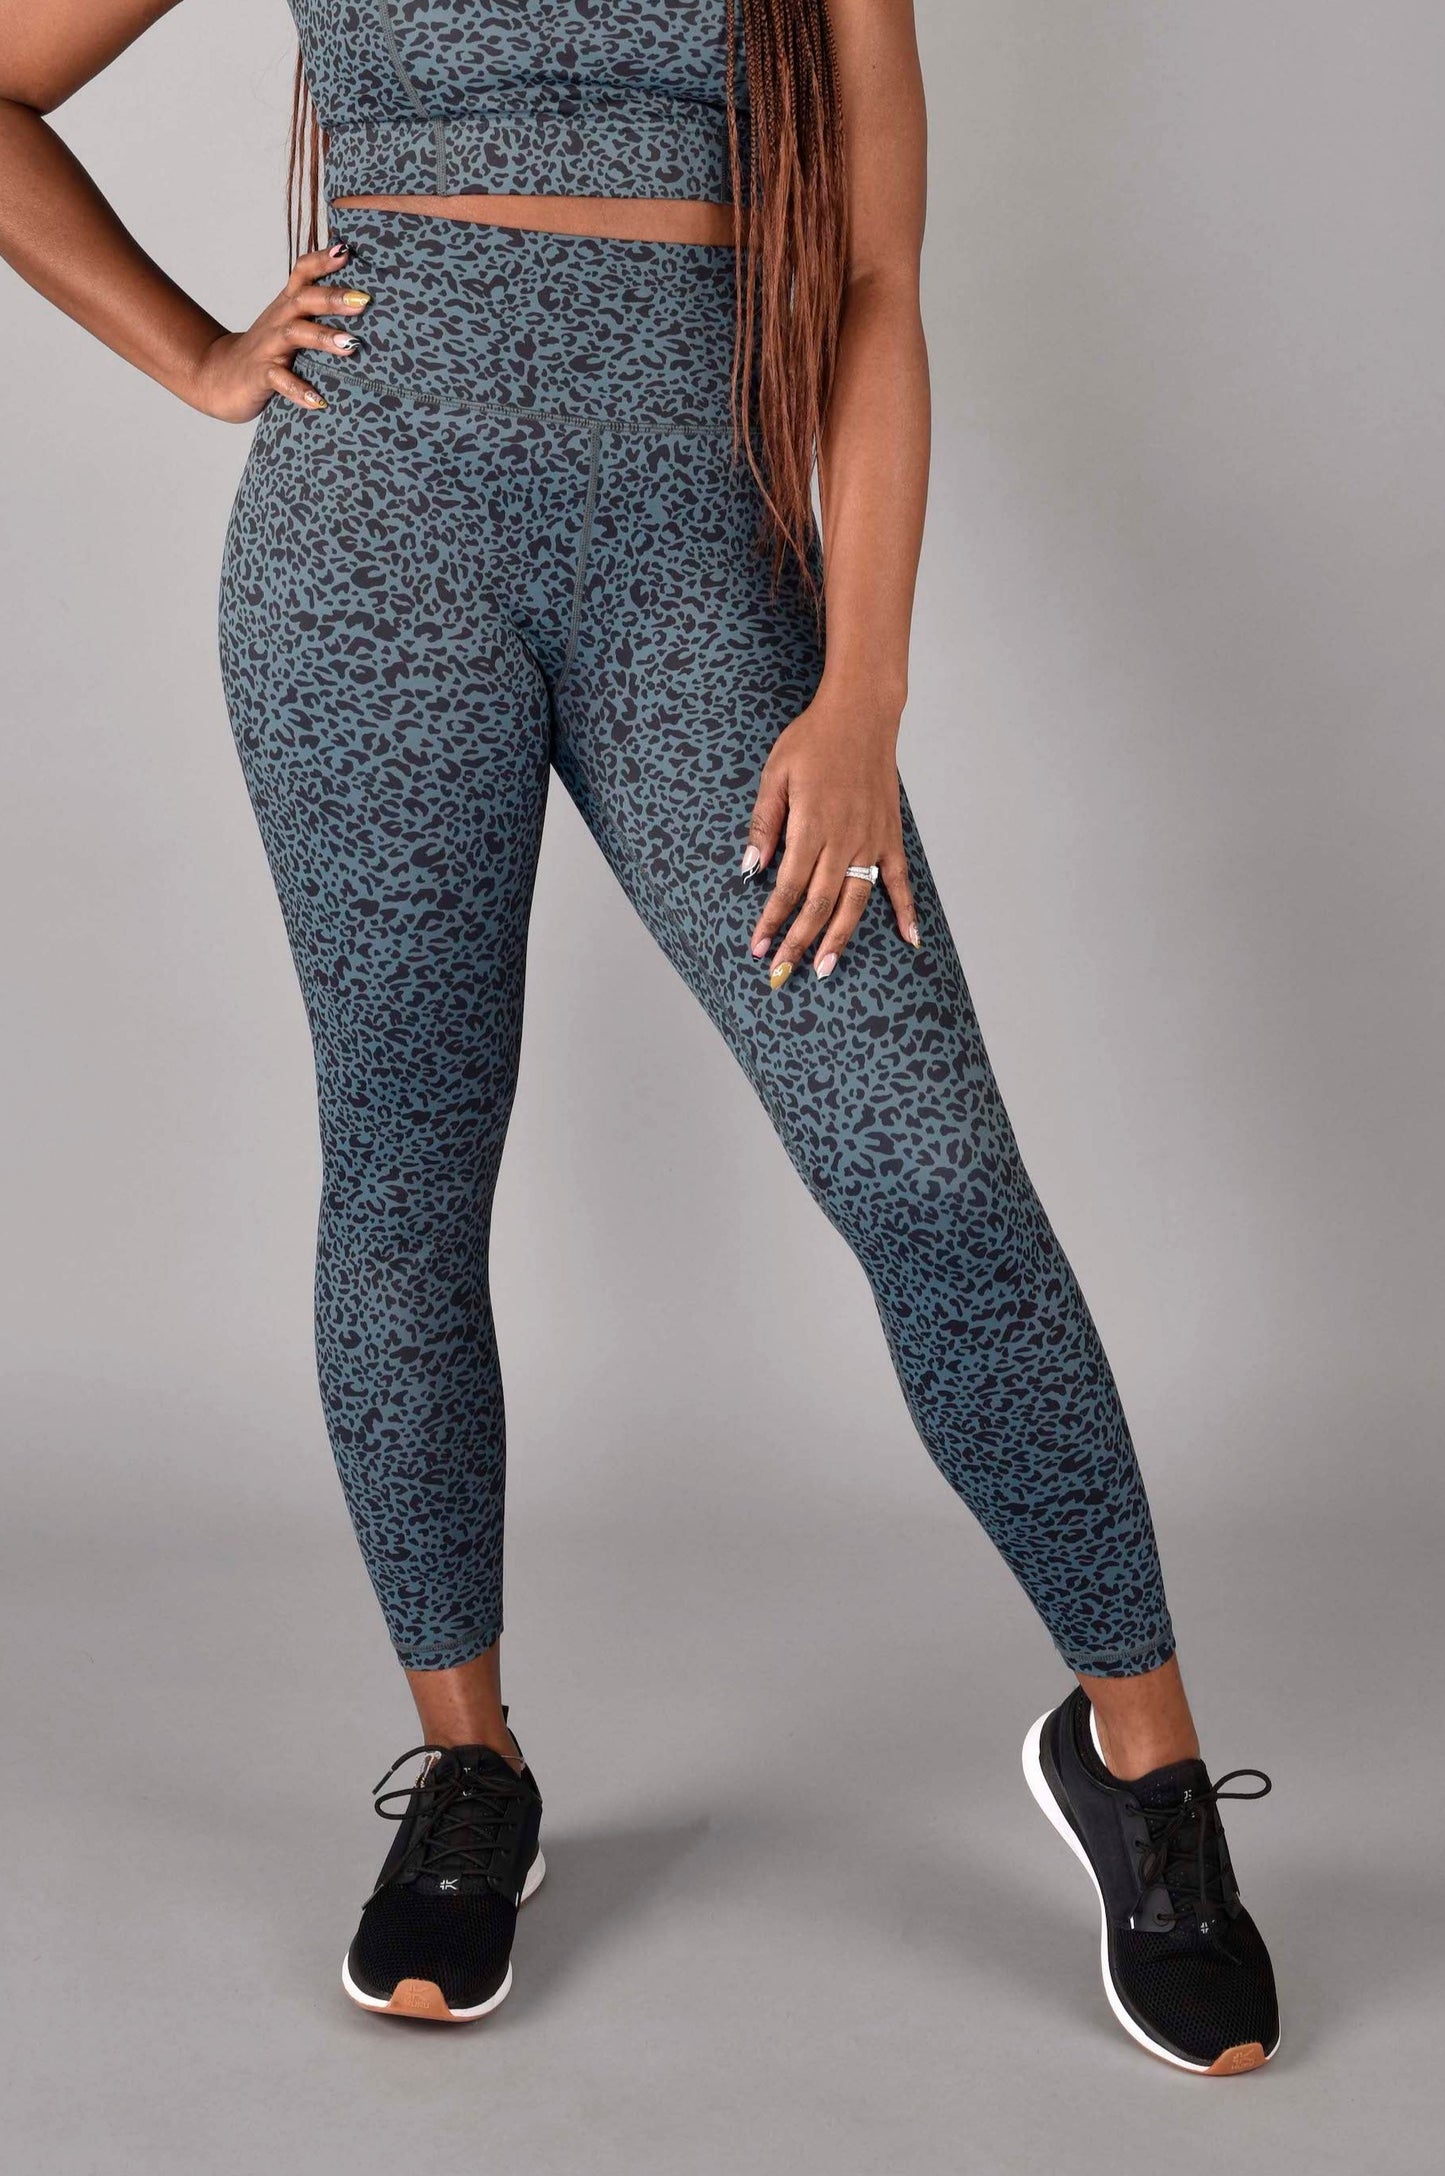 WEAR LOVE MORE Ultra High Rise Recycled Luxe 7/8 Legging in Emerald Leopard Print. Sustainable Activewear in Leopard Print. Leopard Print Legging. Matching Set.